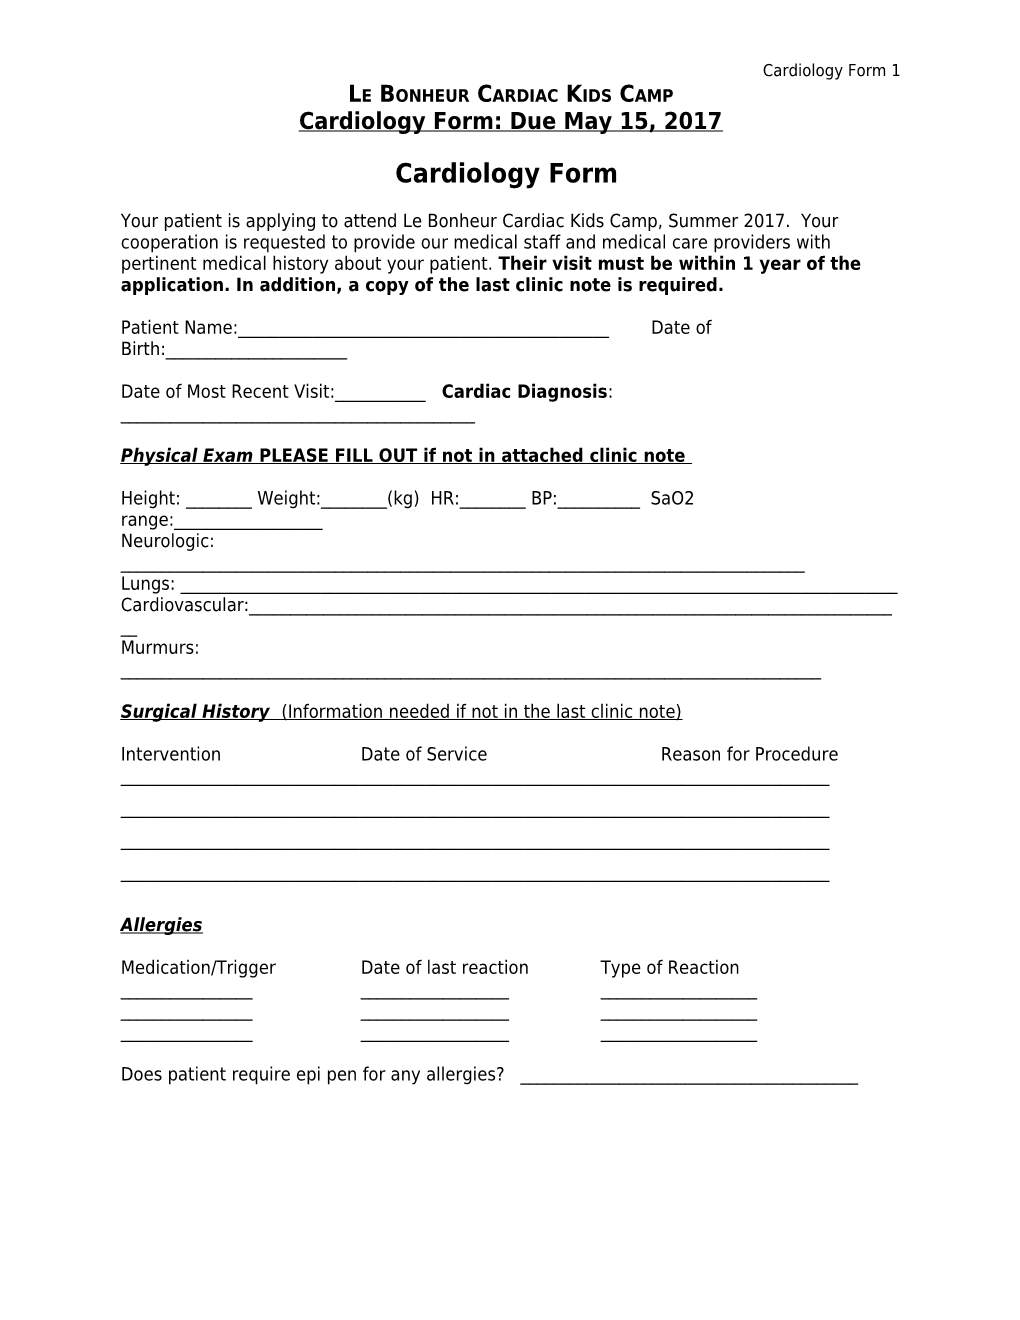 I (We) Hereby Authorize Release of the Information Requested on This Form This Form To